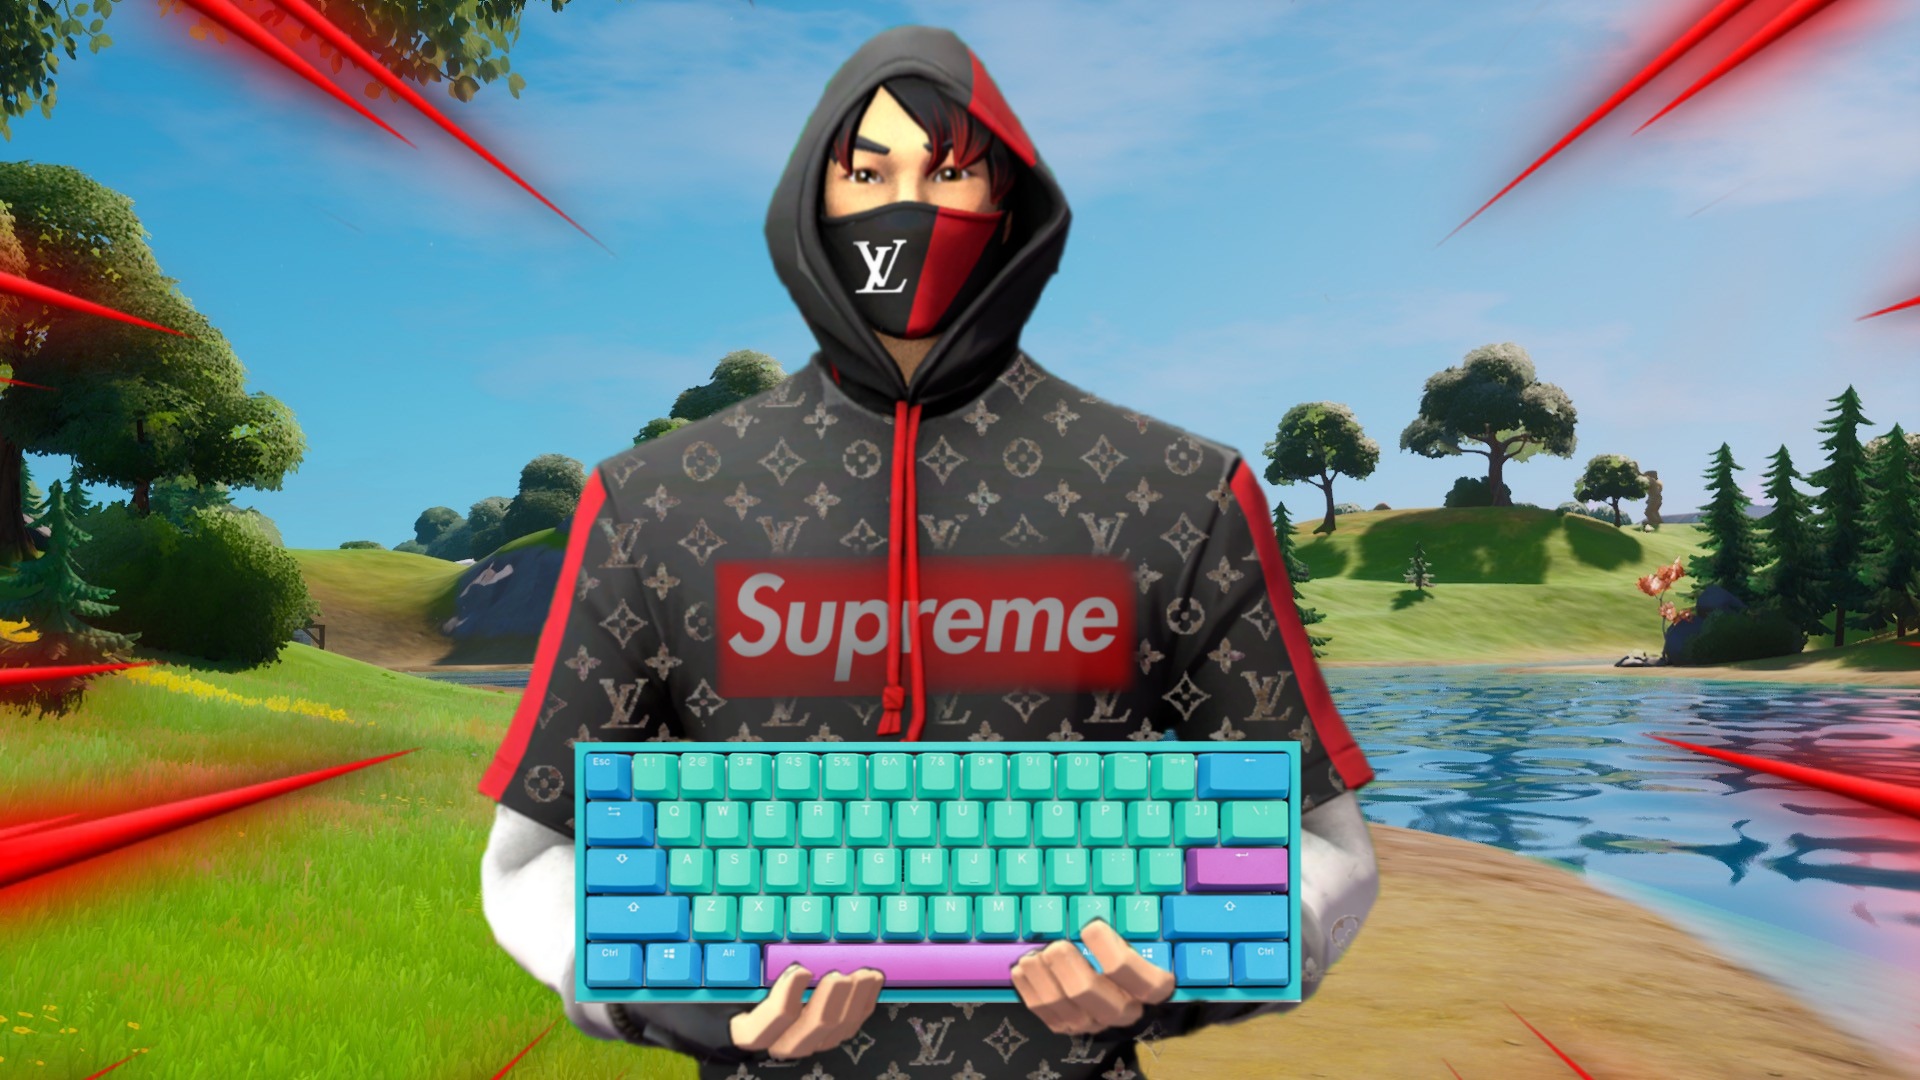 Gucci Fortnite Ikonik Supreme Wallpaper : Search your top hd images for ...